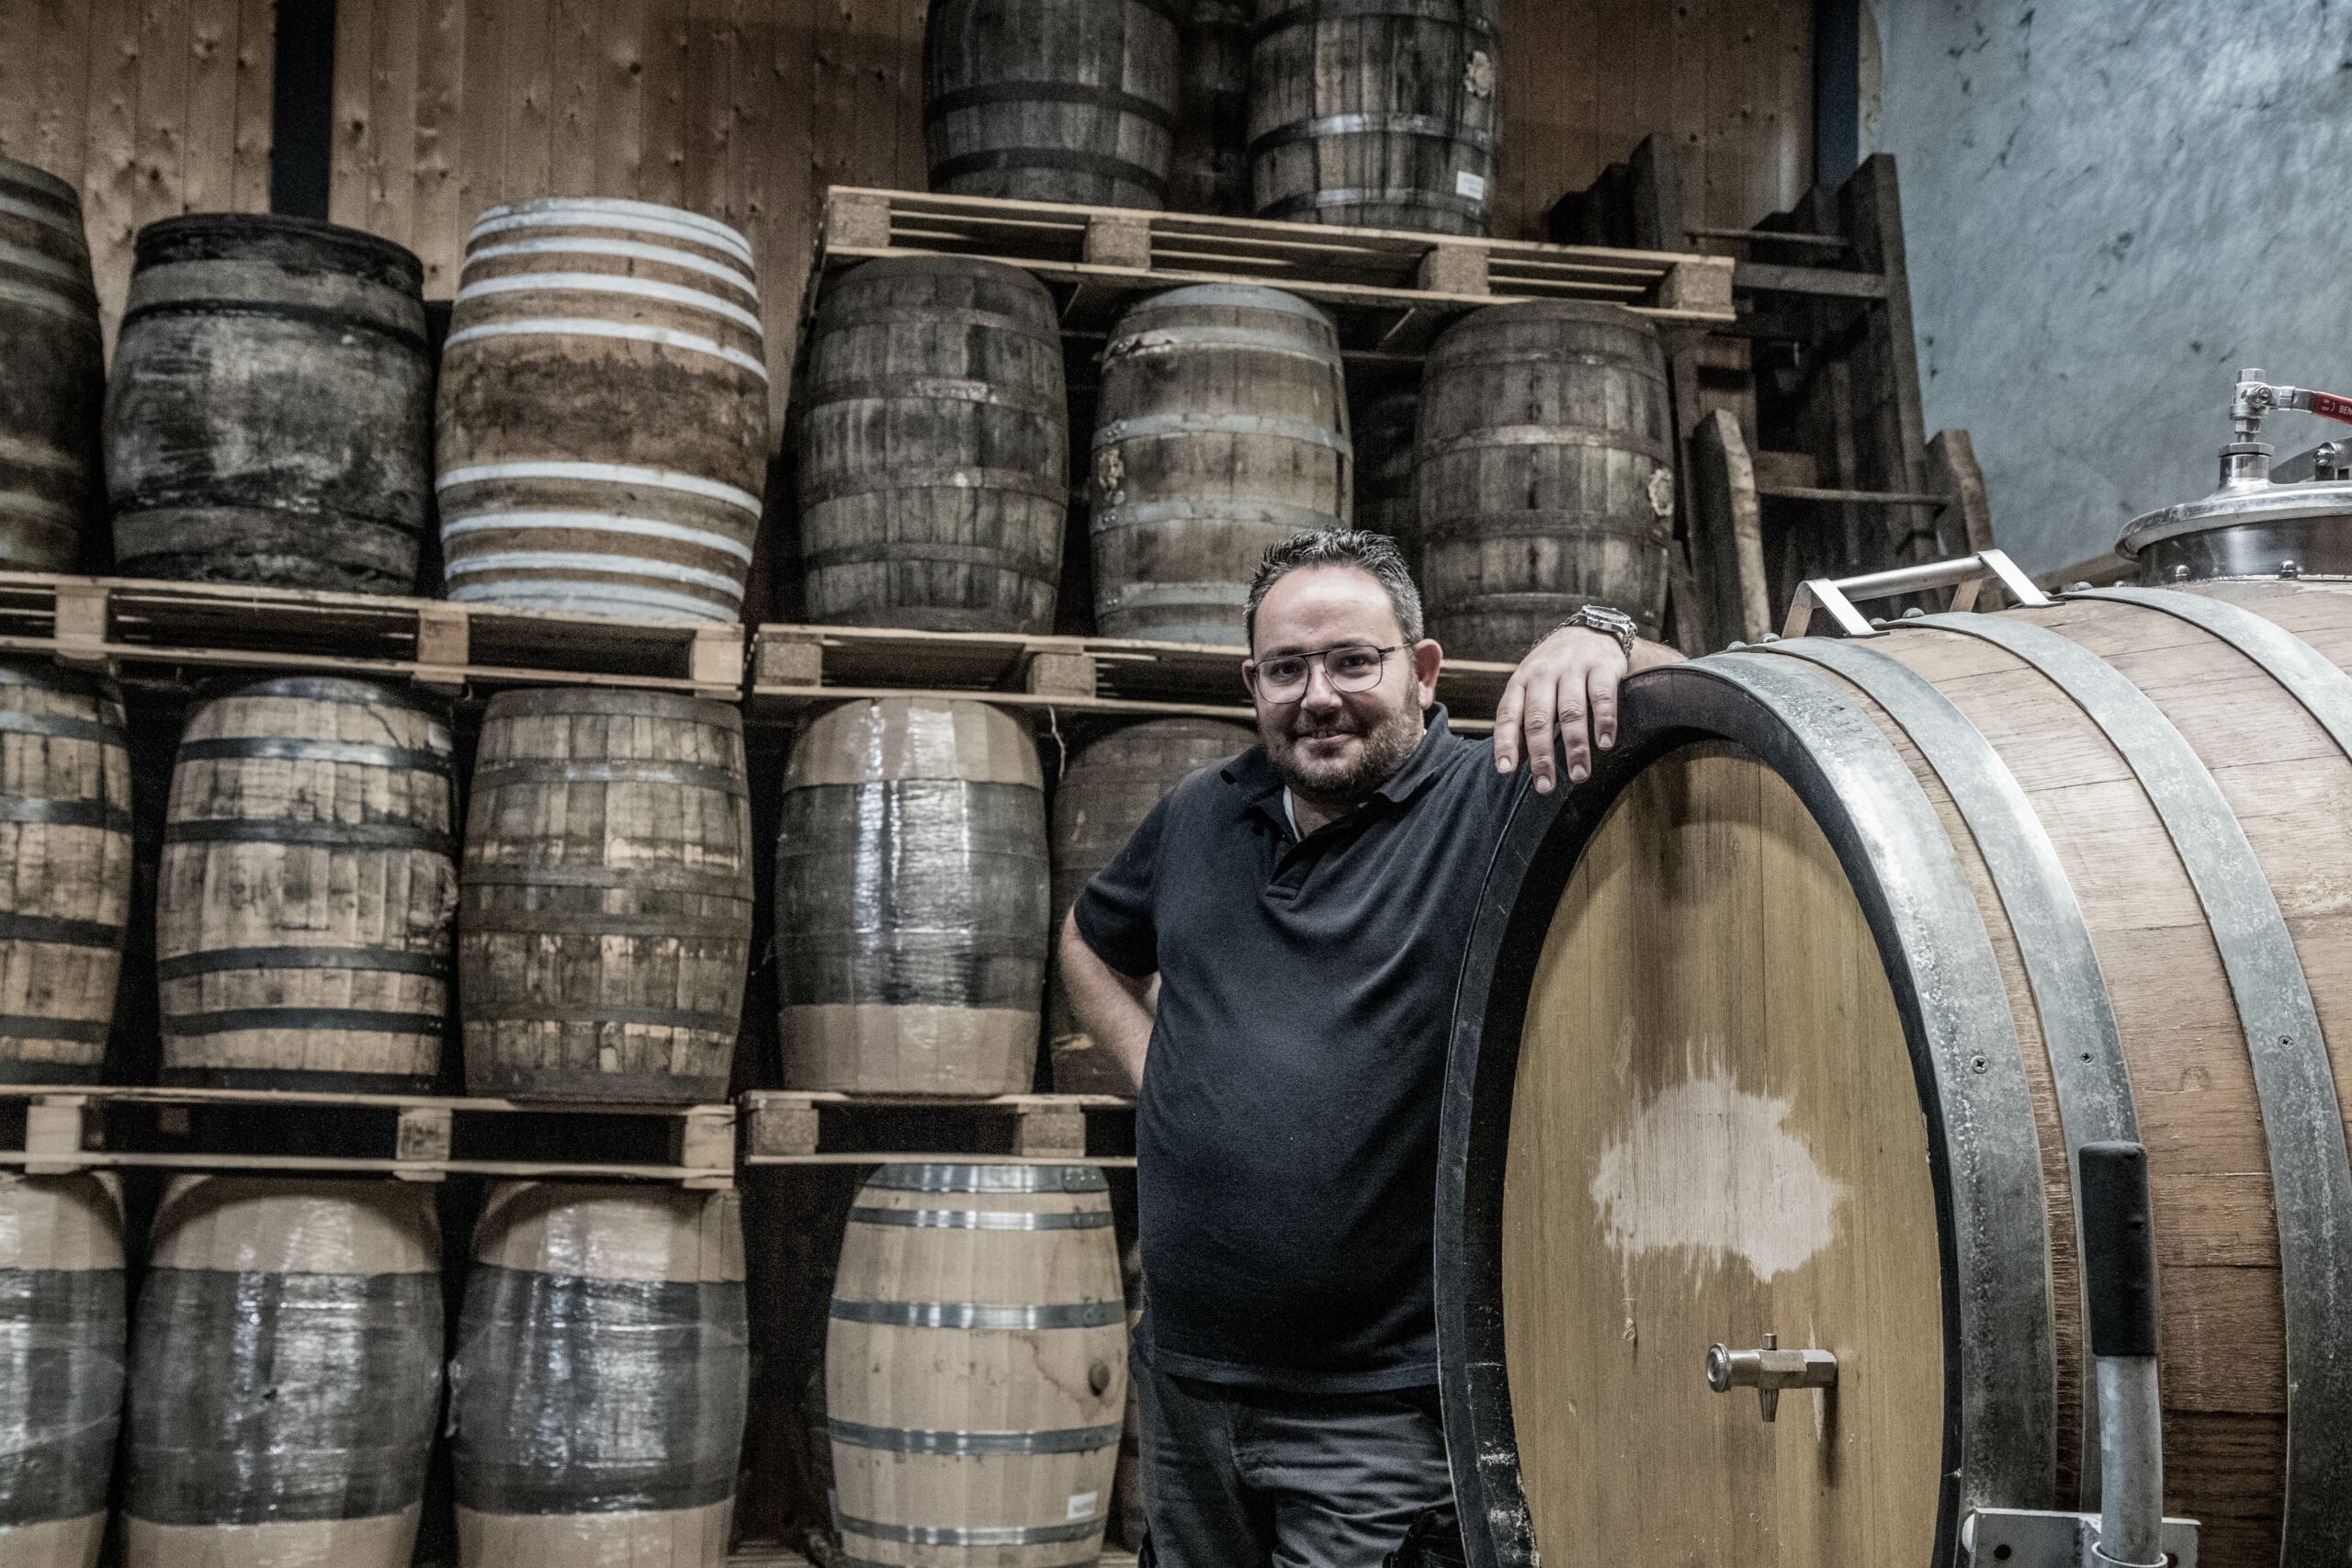 An experienced and renowned supplier of wooden barrels for maturing beers and spirits.